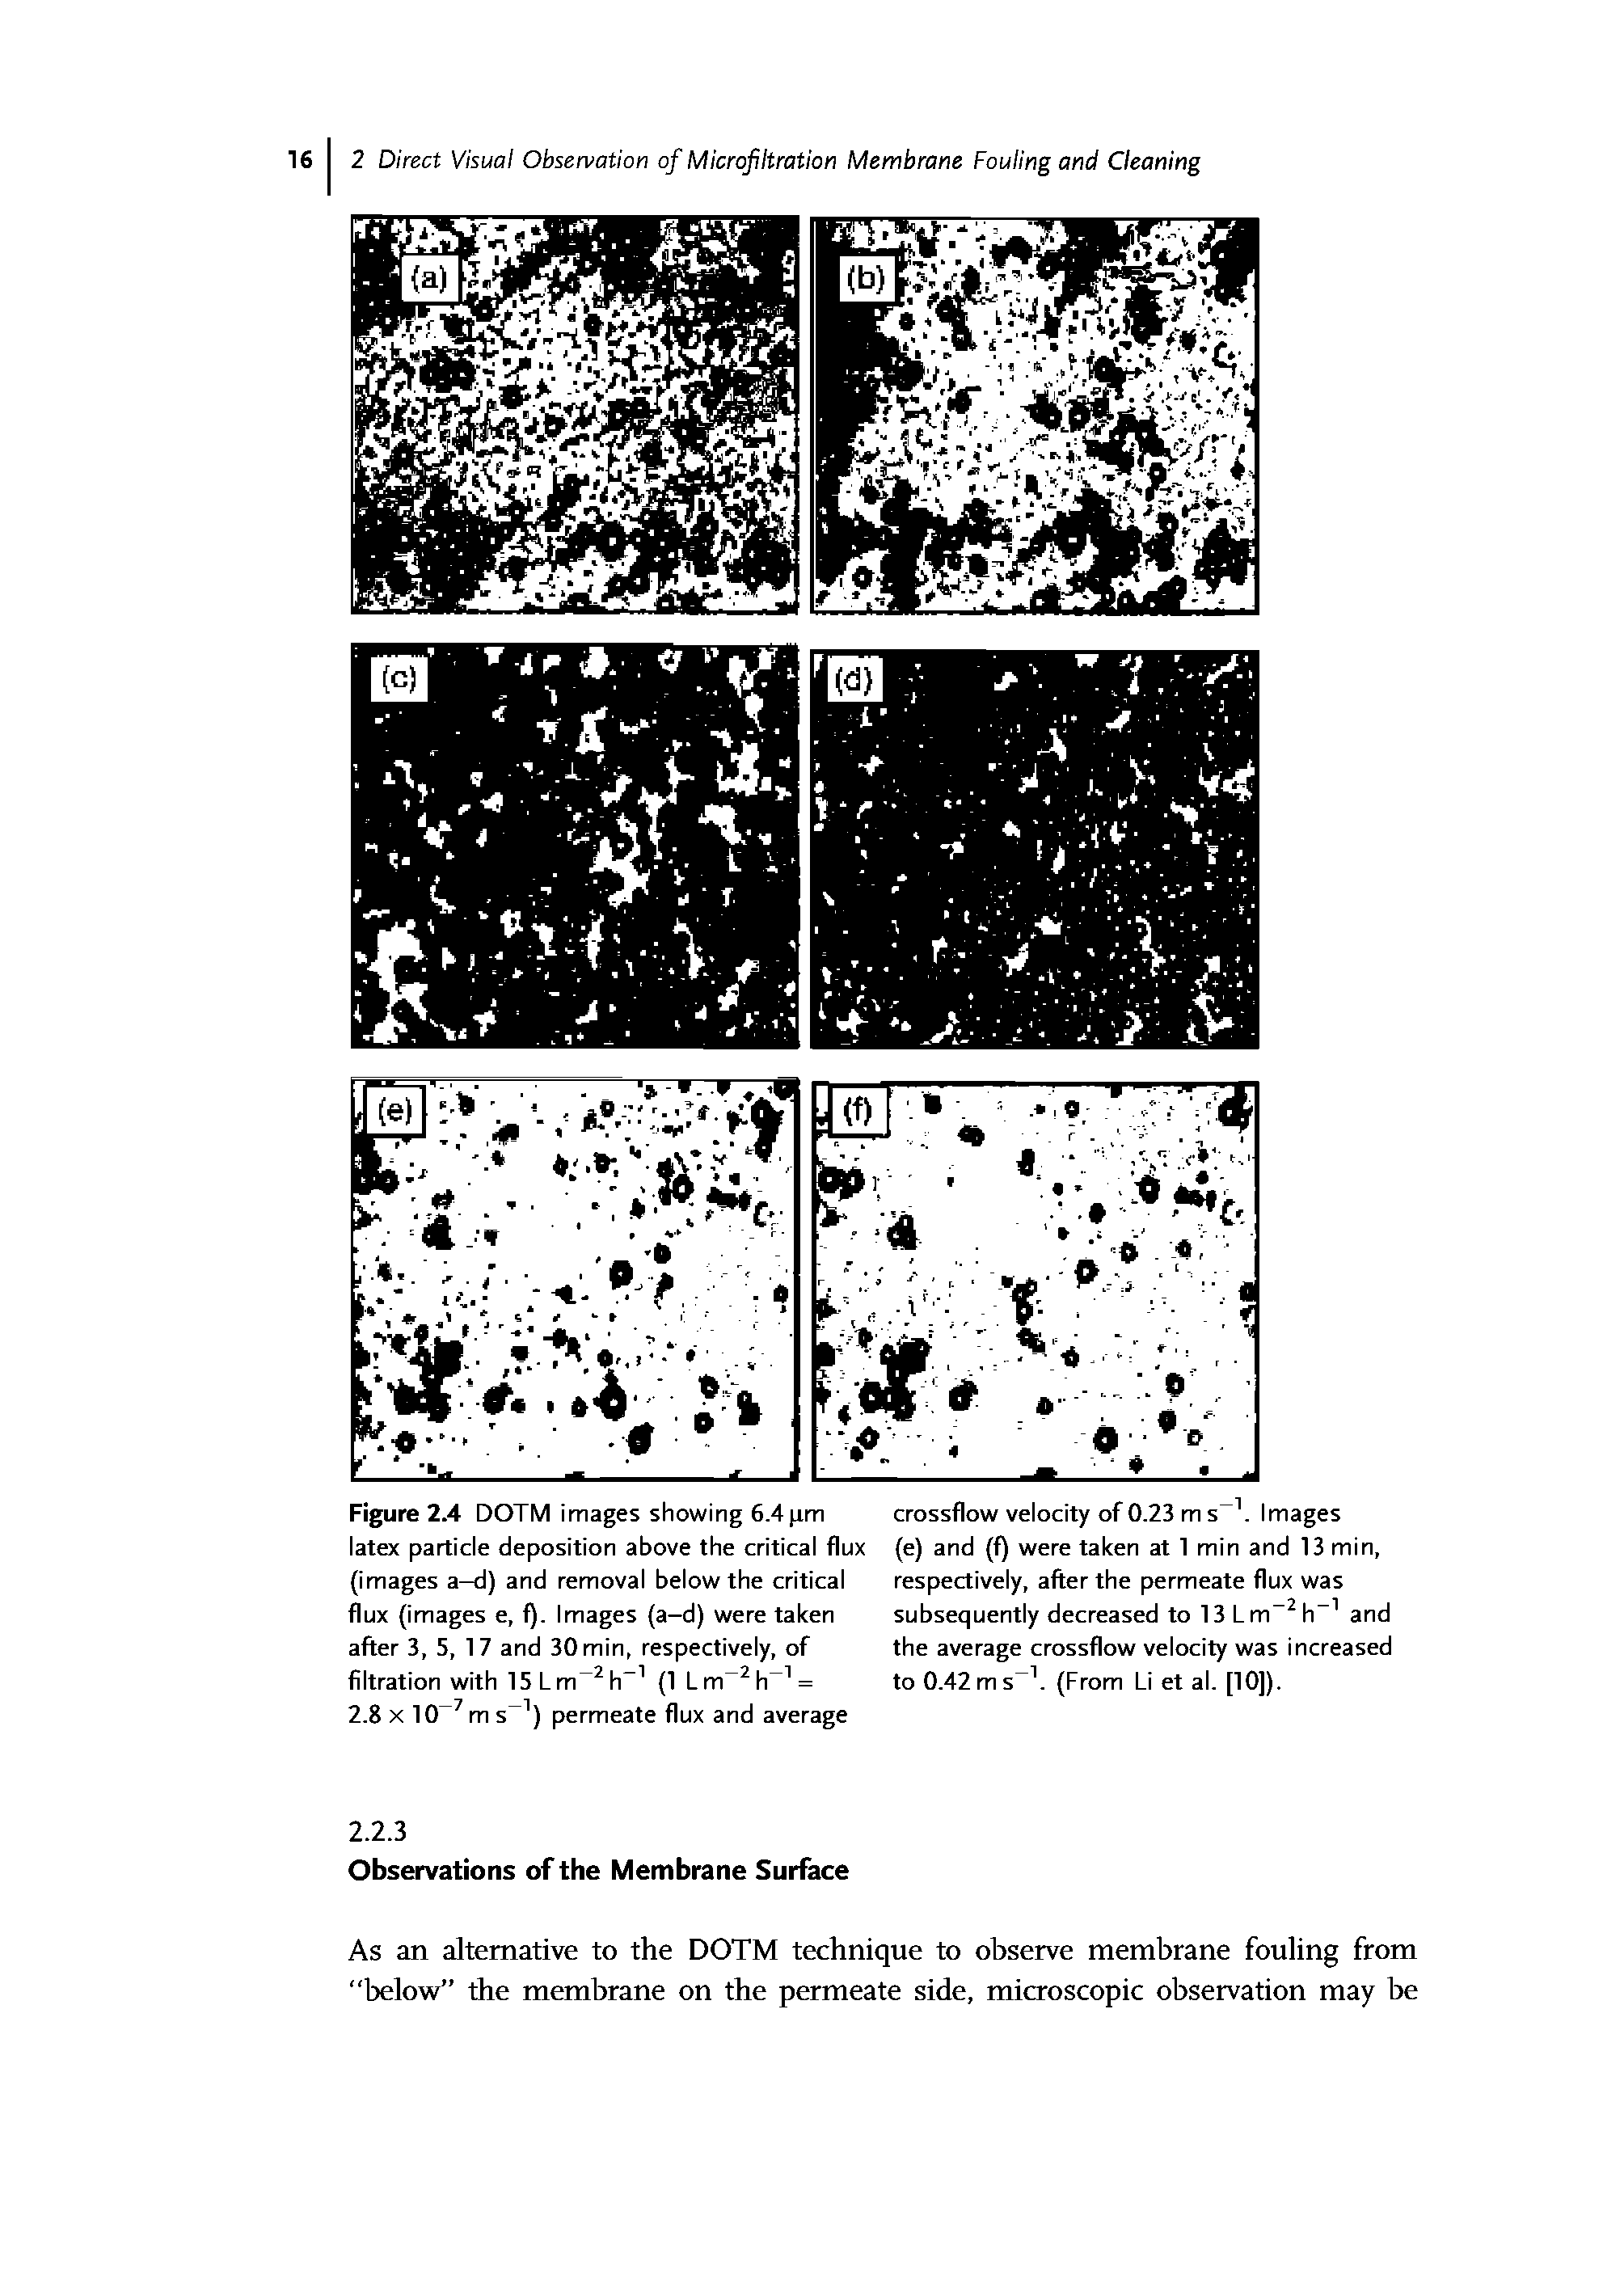 Figure 2.4 DOTM images showing 6.4 im latex particle deposition above the critical flux (images a-d) and removal below the critical flux (images e, f). Images (a-d) were taken after 3, 5, 17 and 30 min, respectively, of filtration with 15Lm h (1 Lm h =...